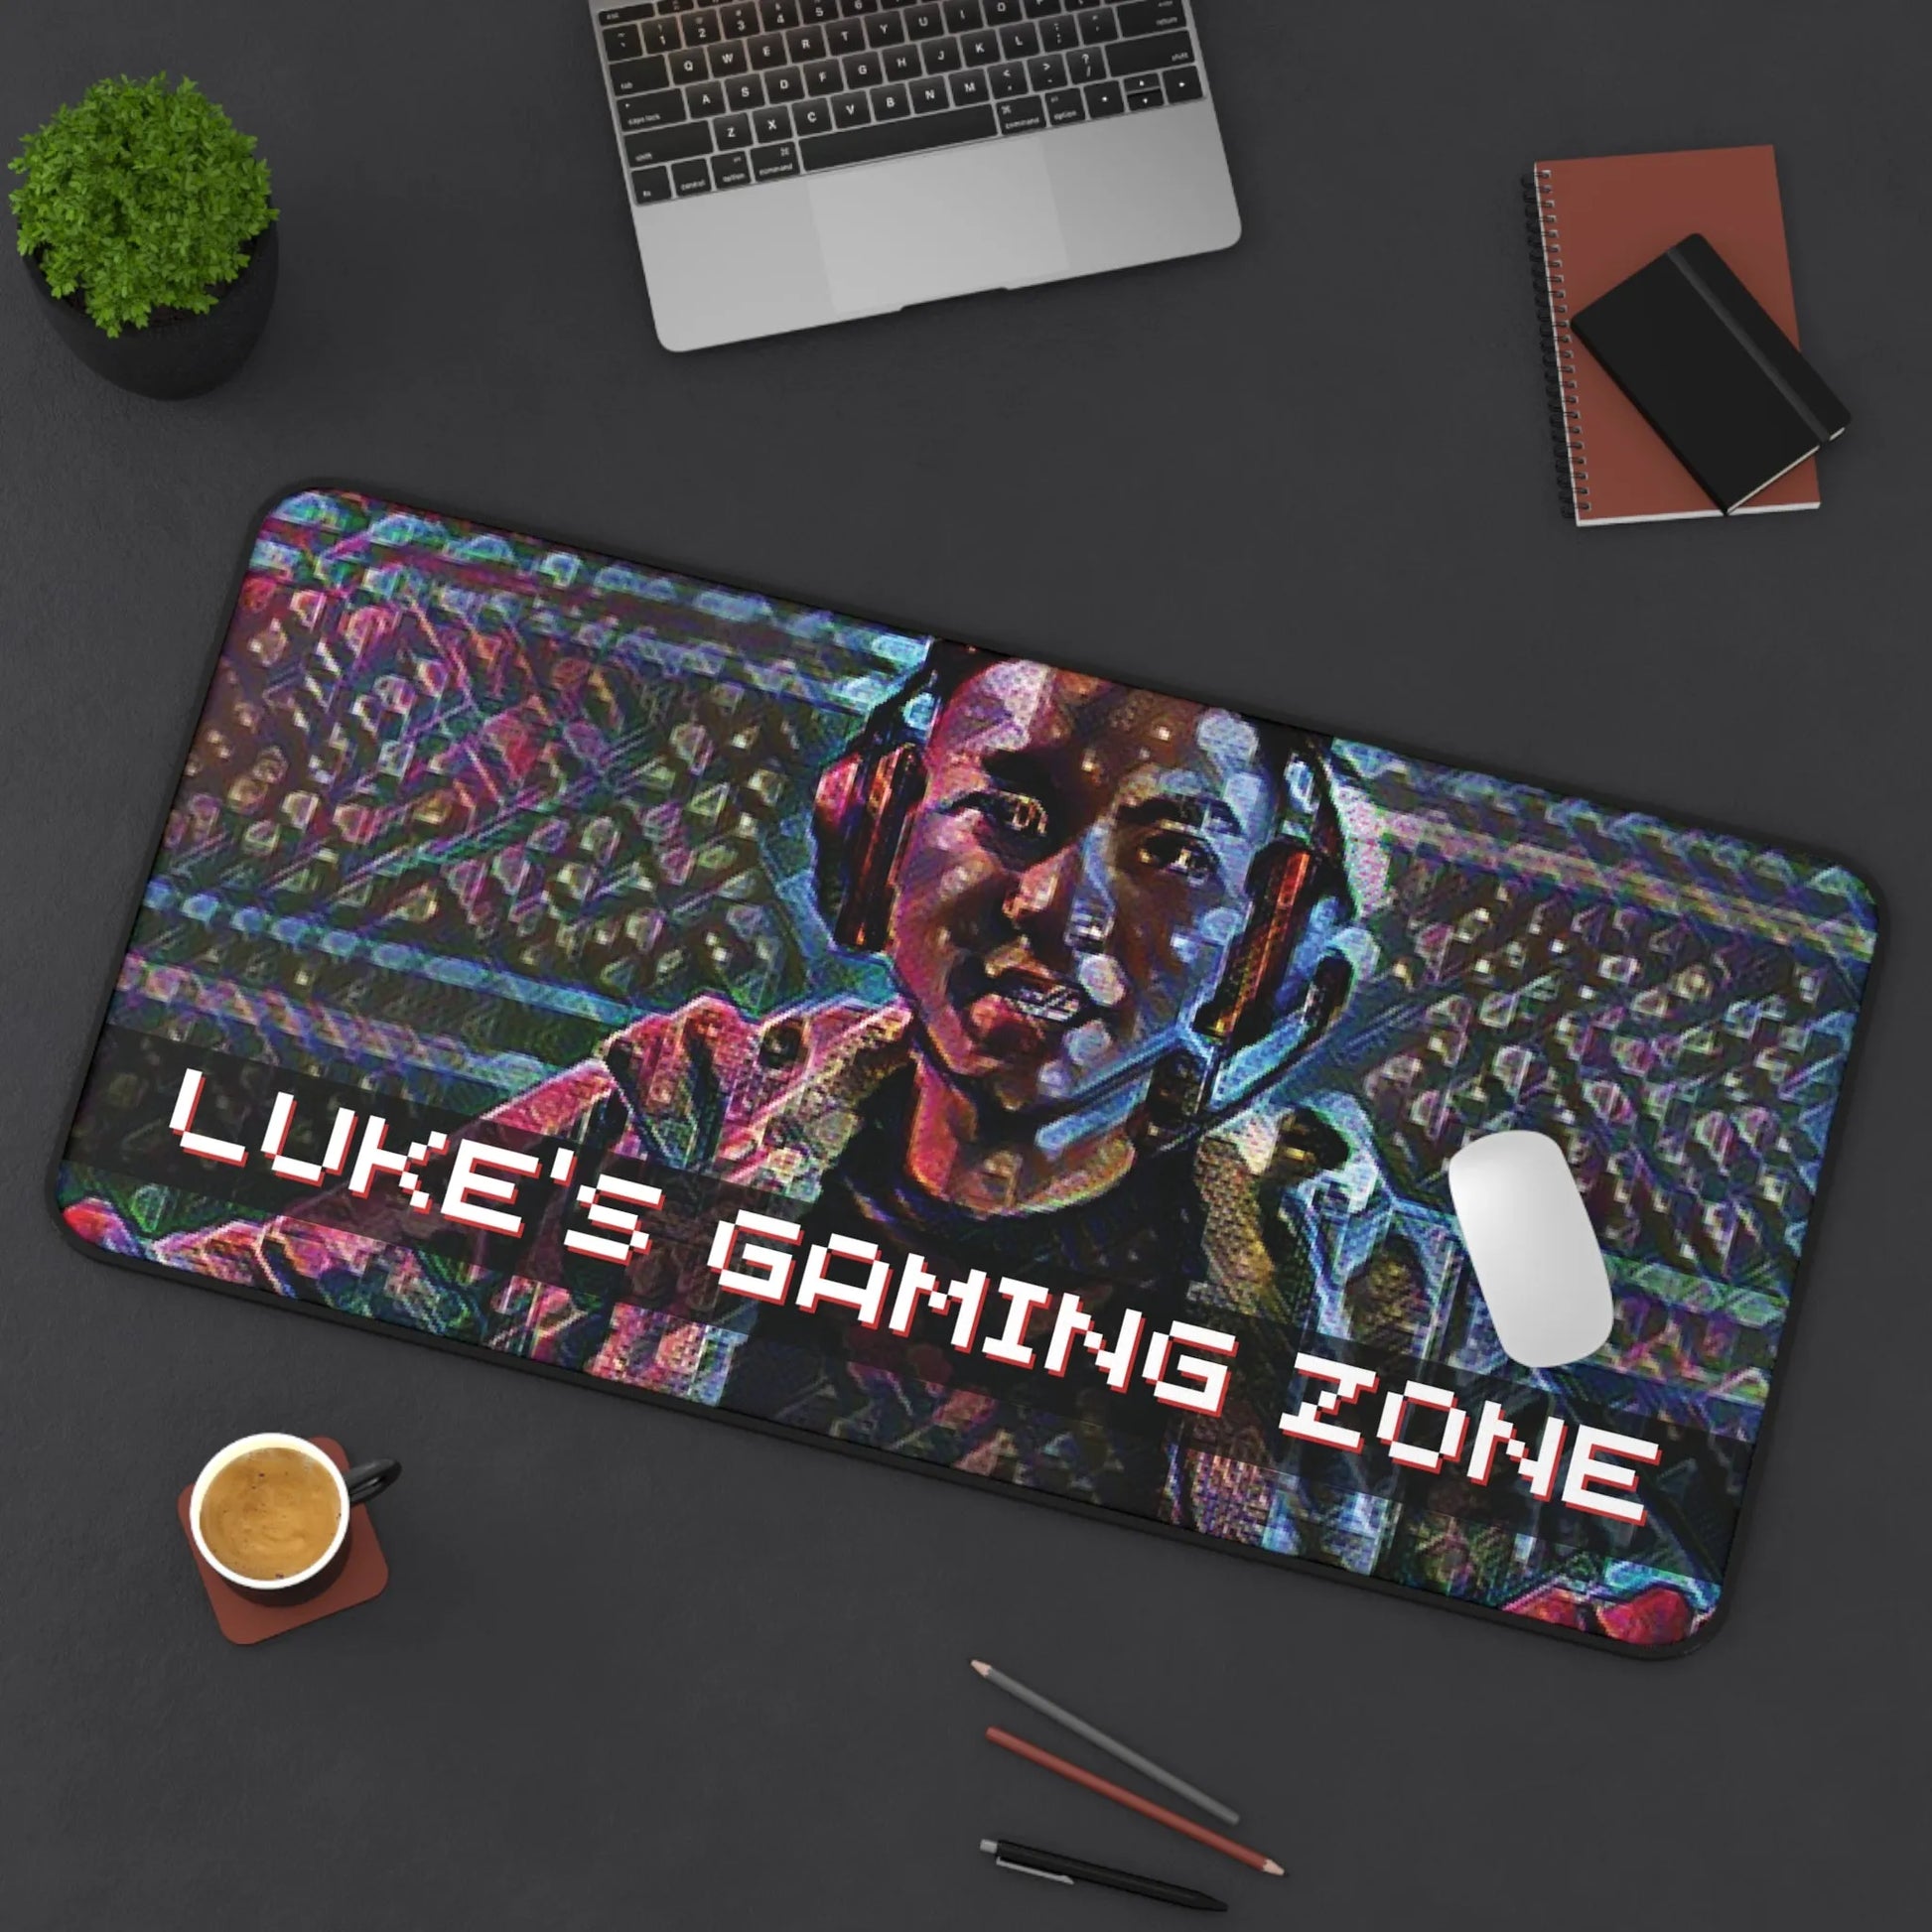 Personalized Gaming Photo Desk Mat -  Level Up Your Gaming Space with Customized Photo Gaming Desk Mat large on desk